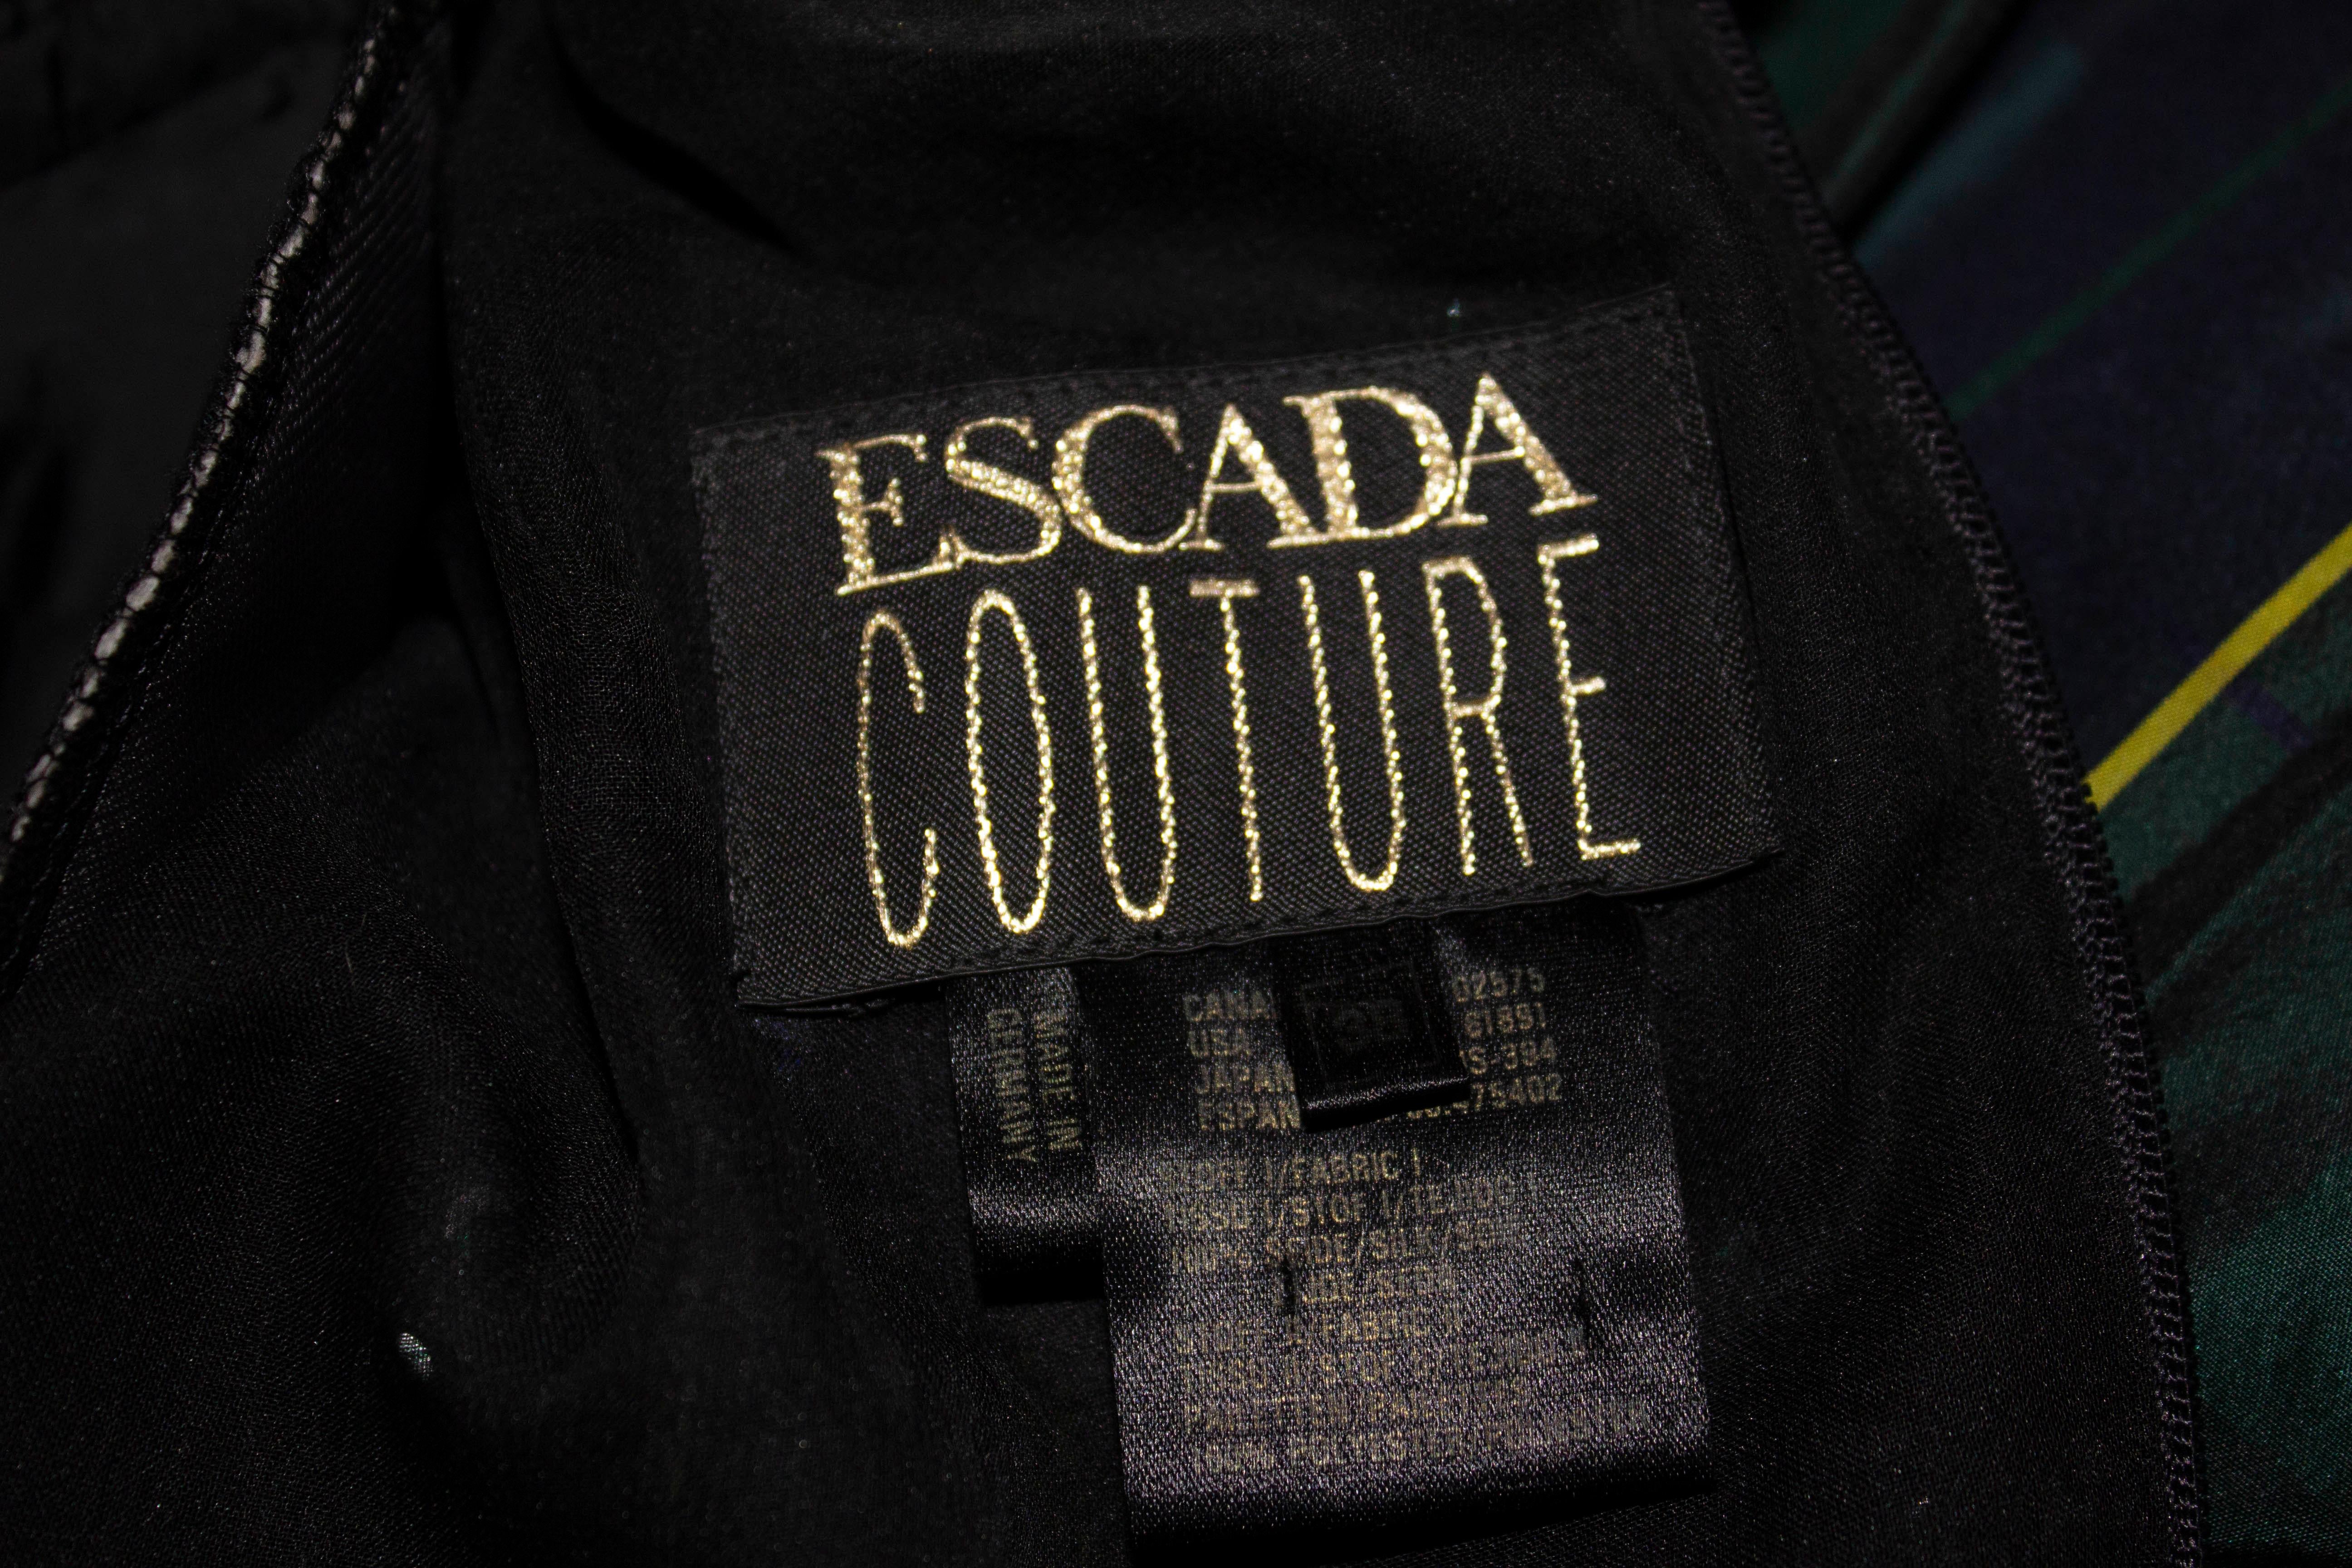 Vintage Evening Gown by Escada Couture 2